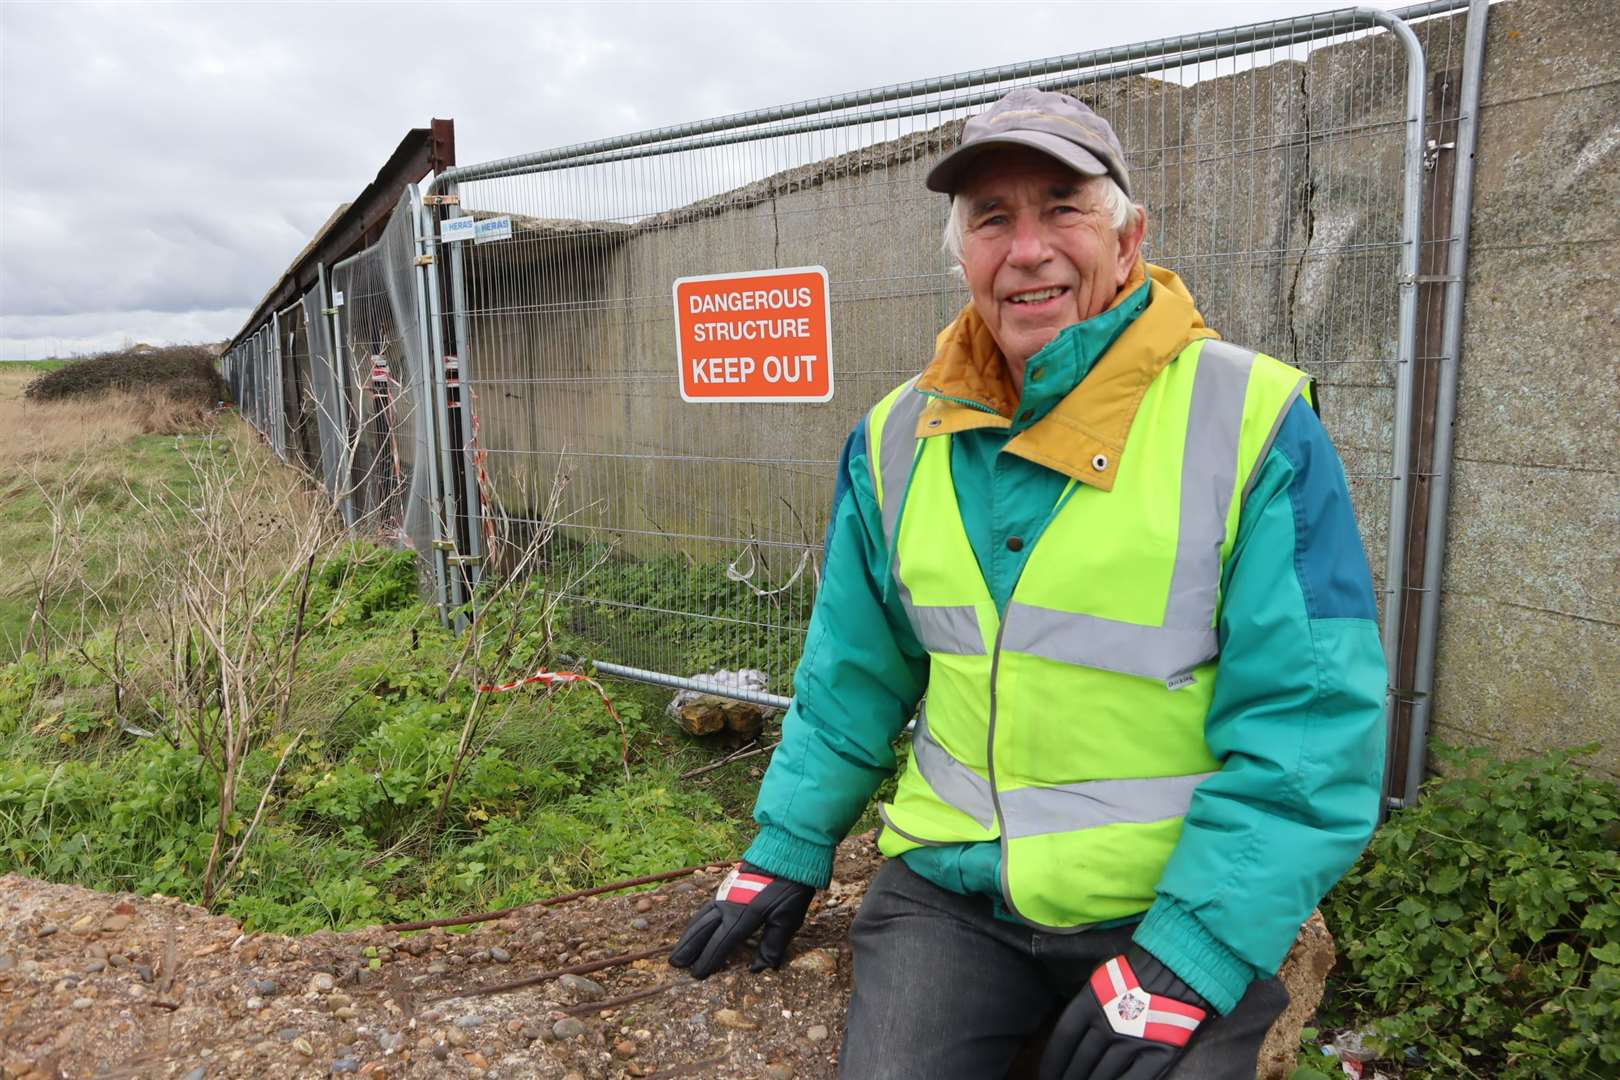 Bernie Watson had plans to build lakeside cabins along the derelict covered way between Sheerness and Minster